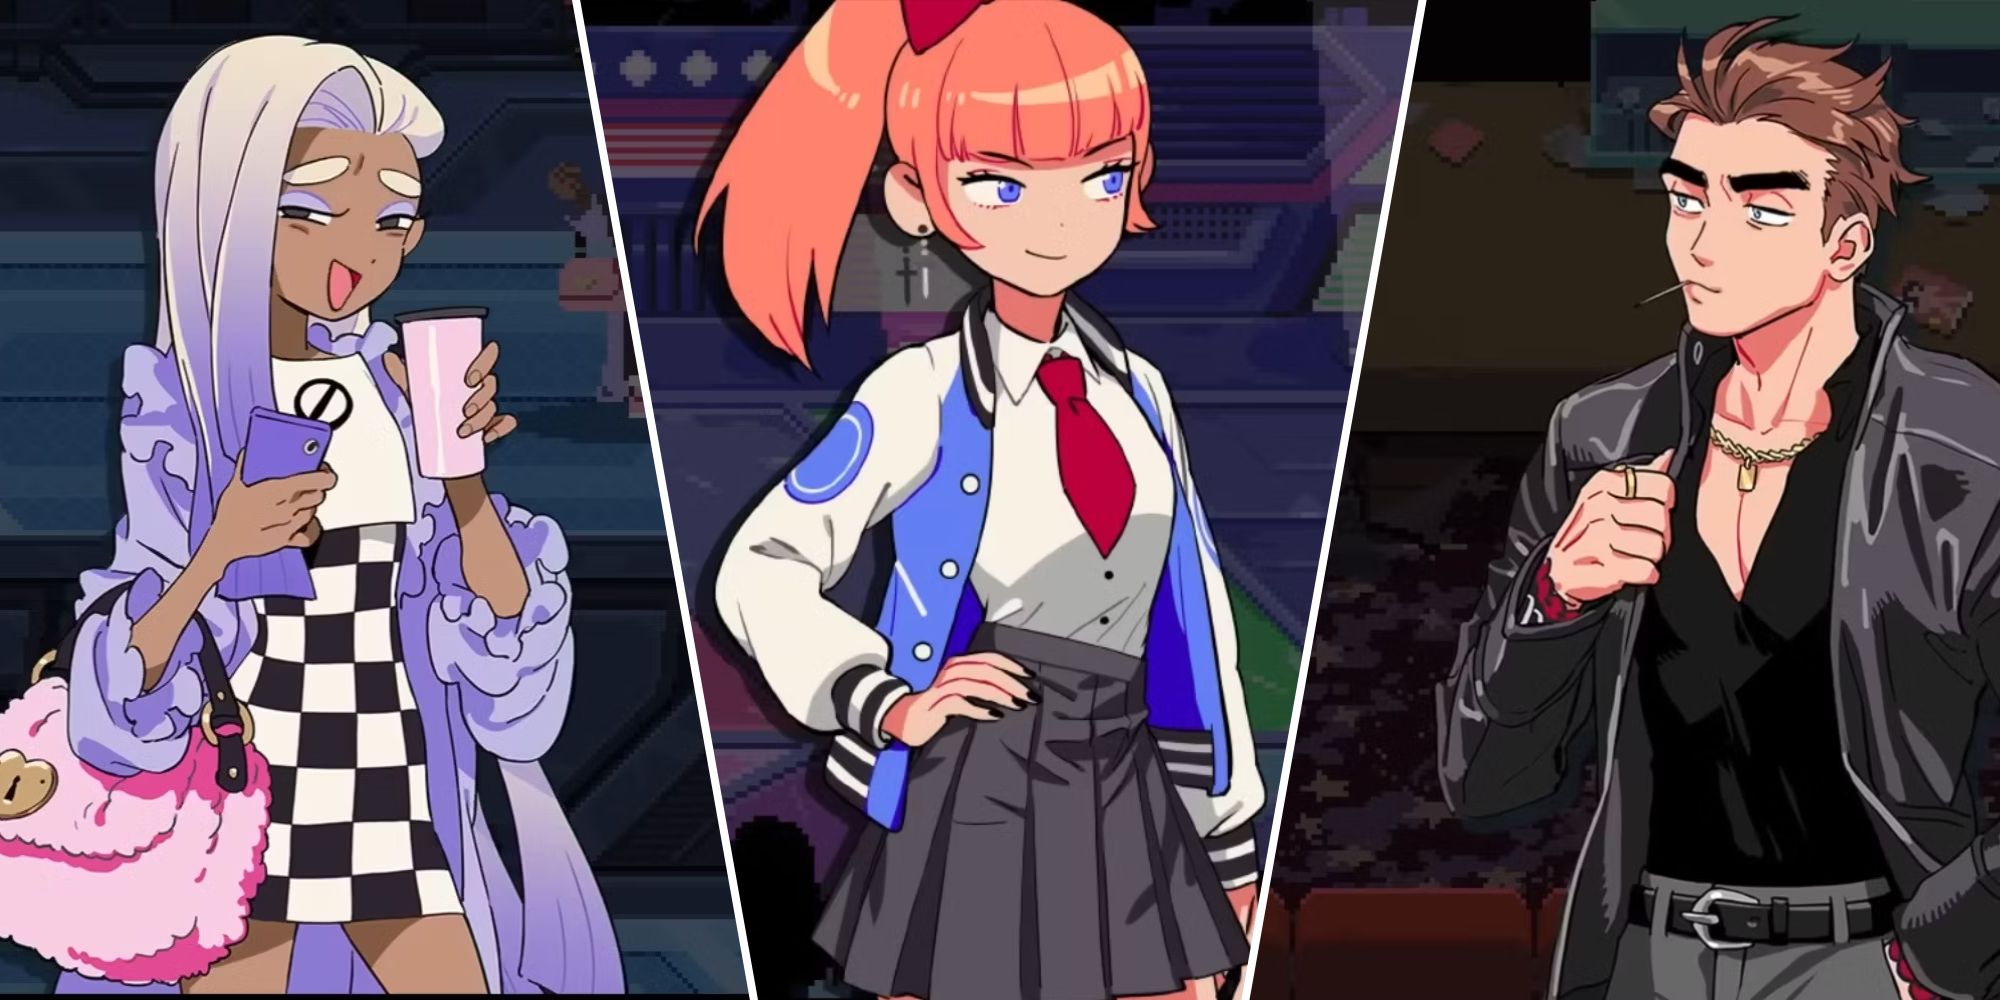 Three Characters From River City Girls 2